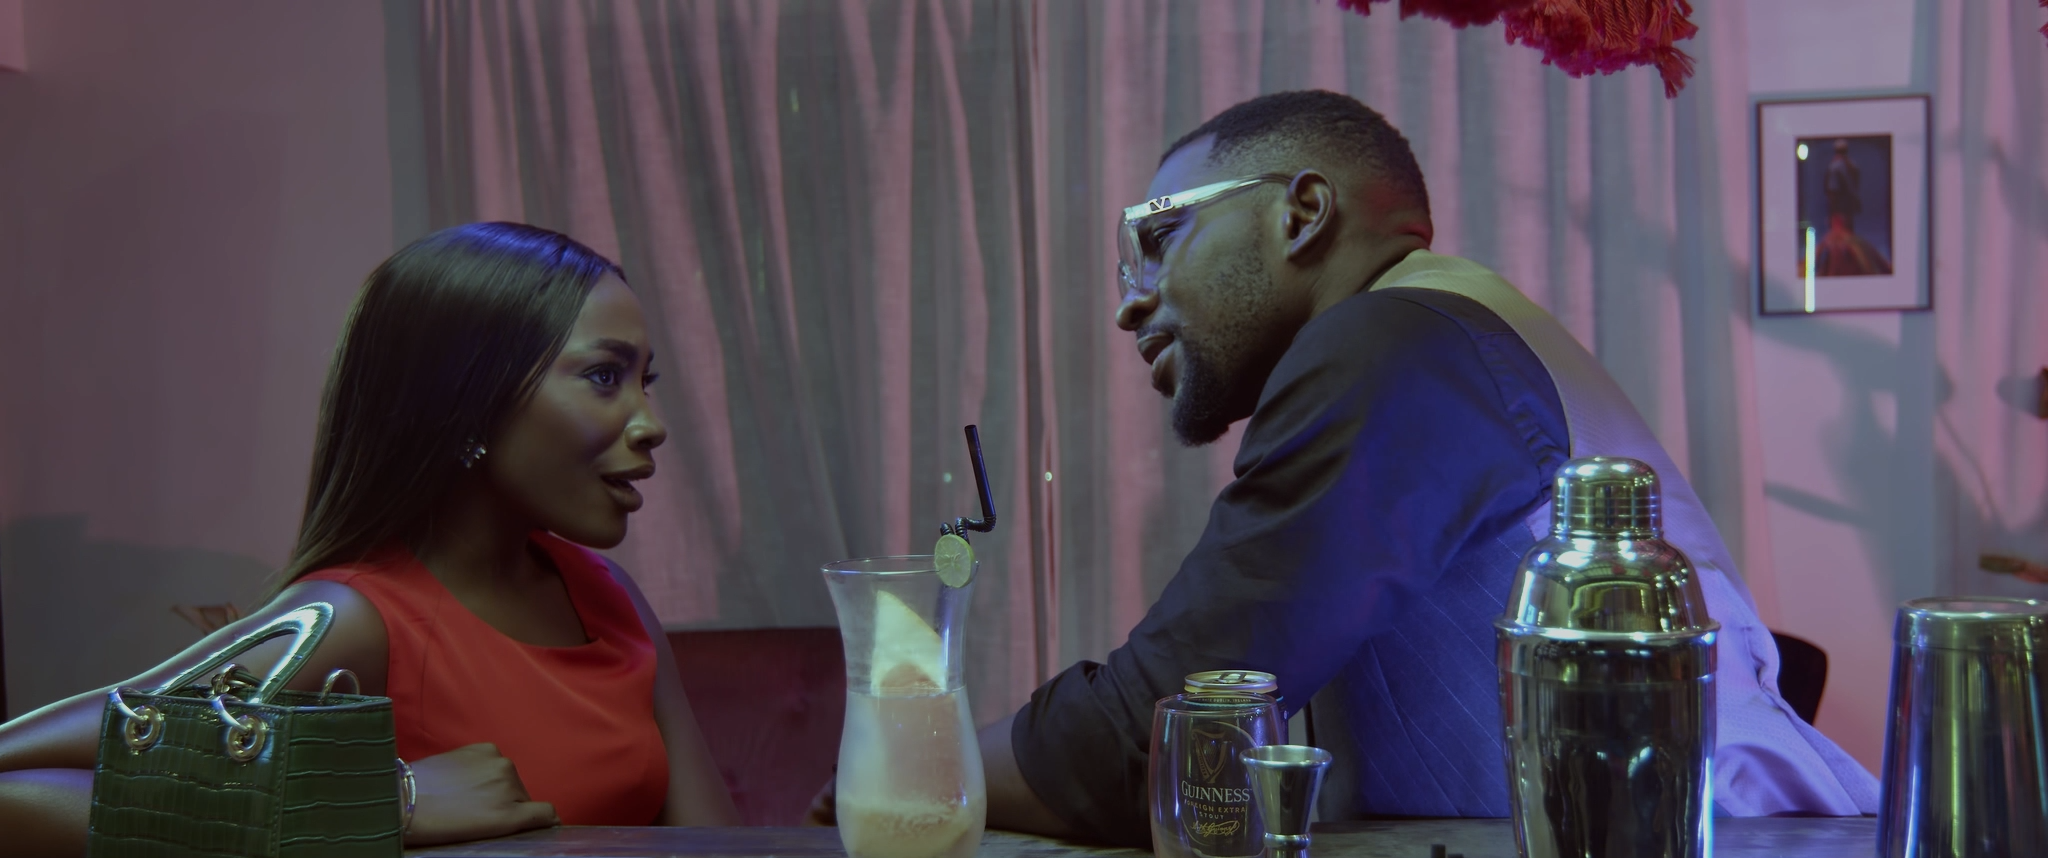 6 1.1.5 - BOO'D UP Short Film Explores Navigating The Complexities of Sexuality